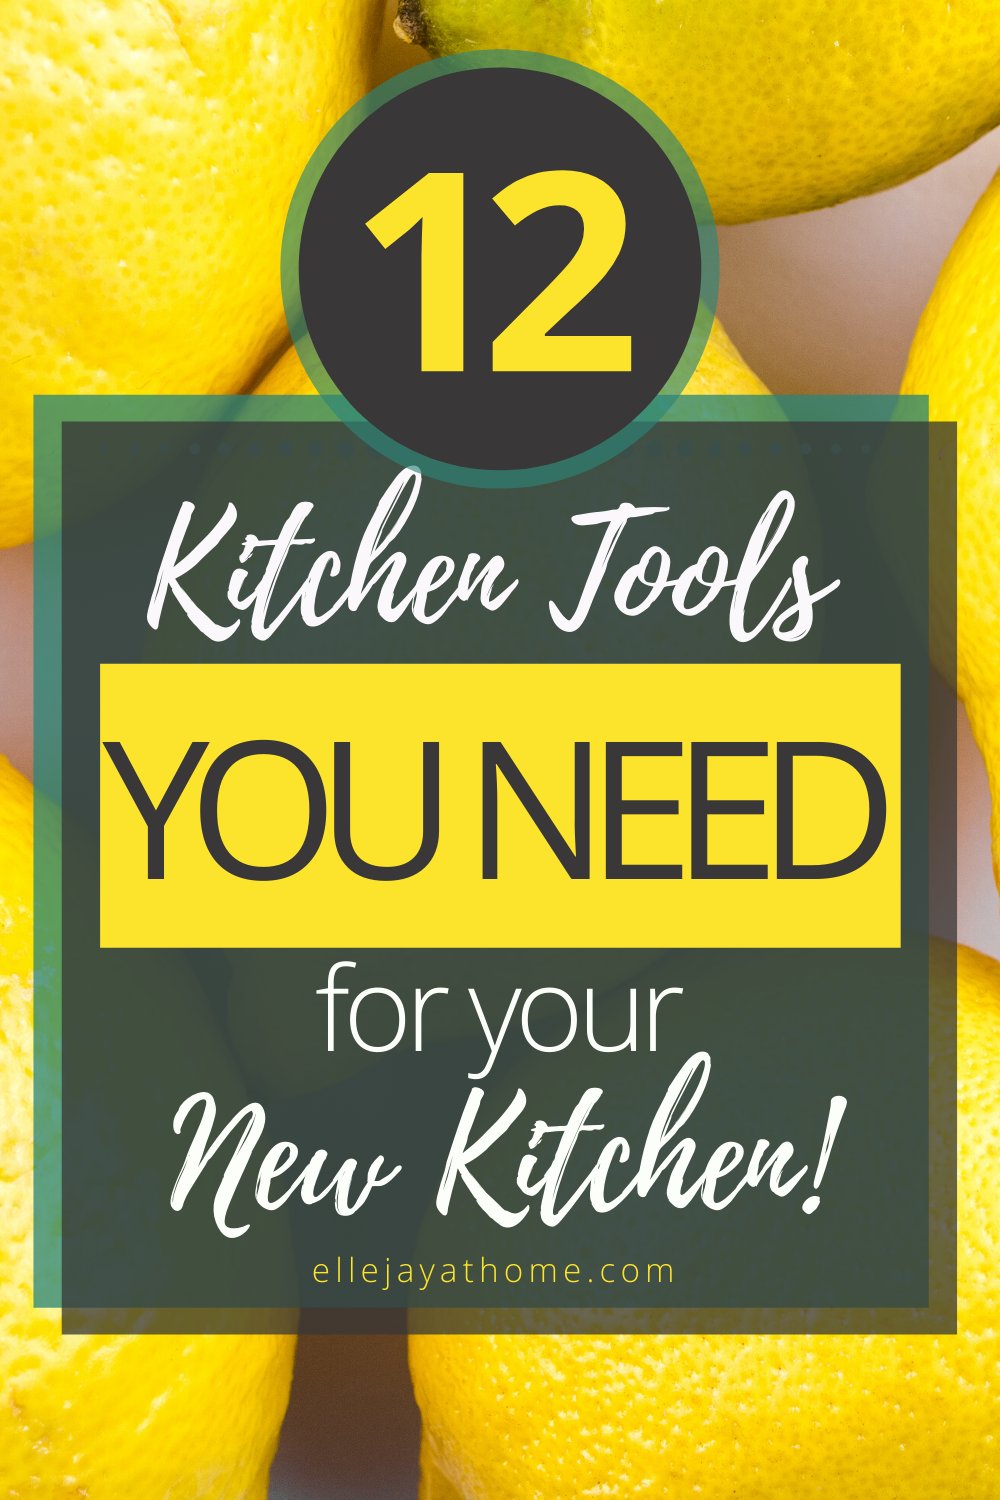 Pin Me! 12 Kitchen Tools You Need in a New Kitchen!